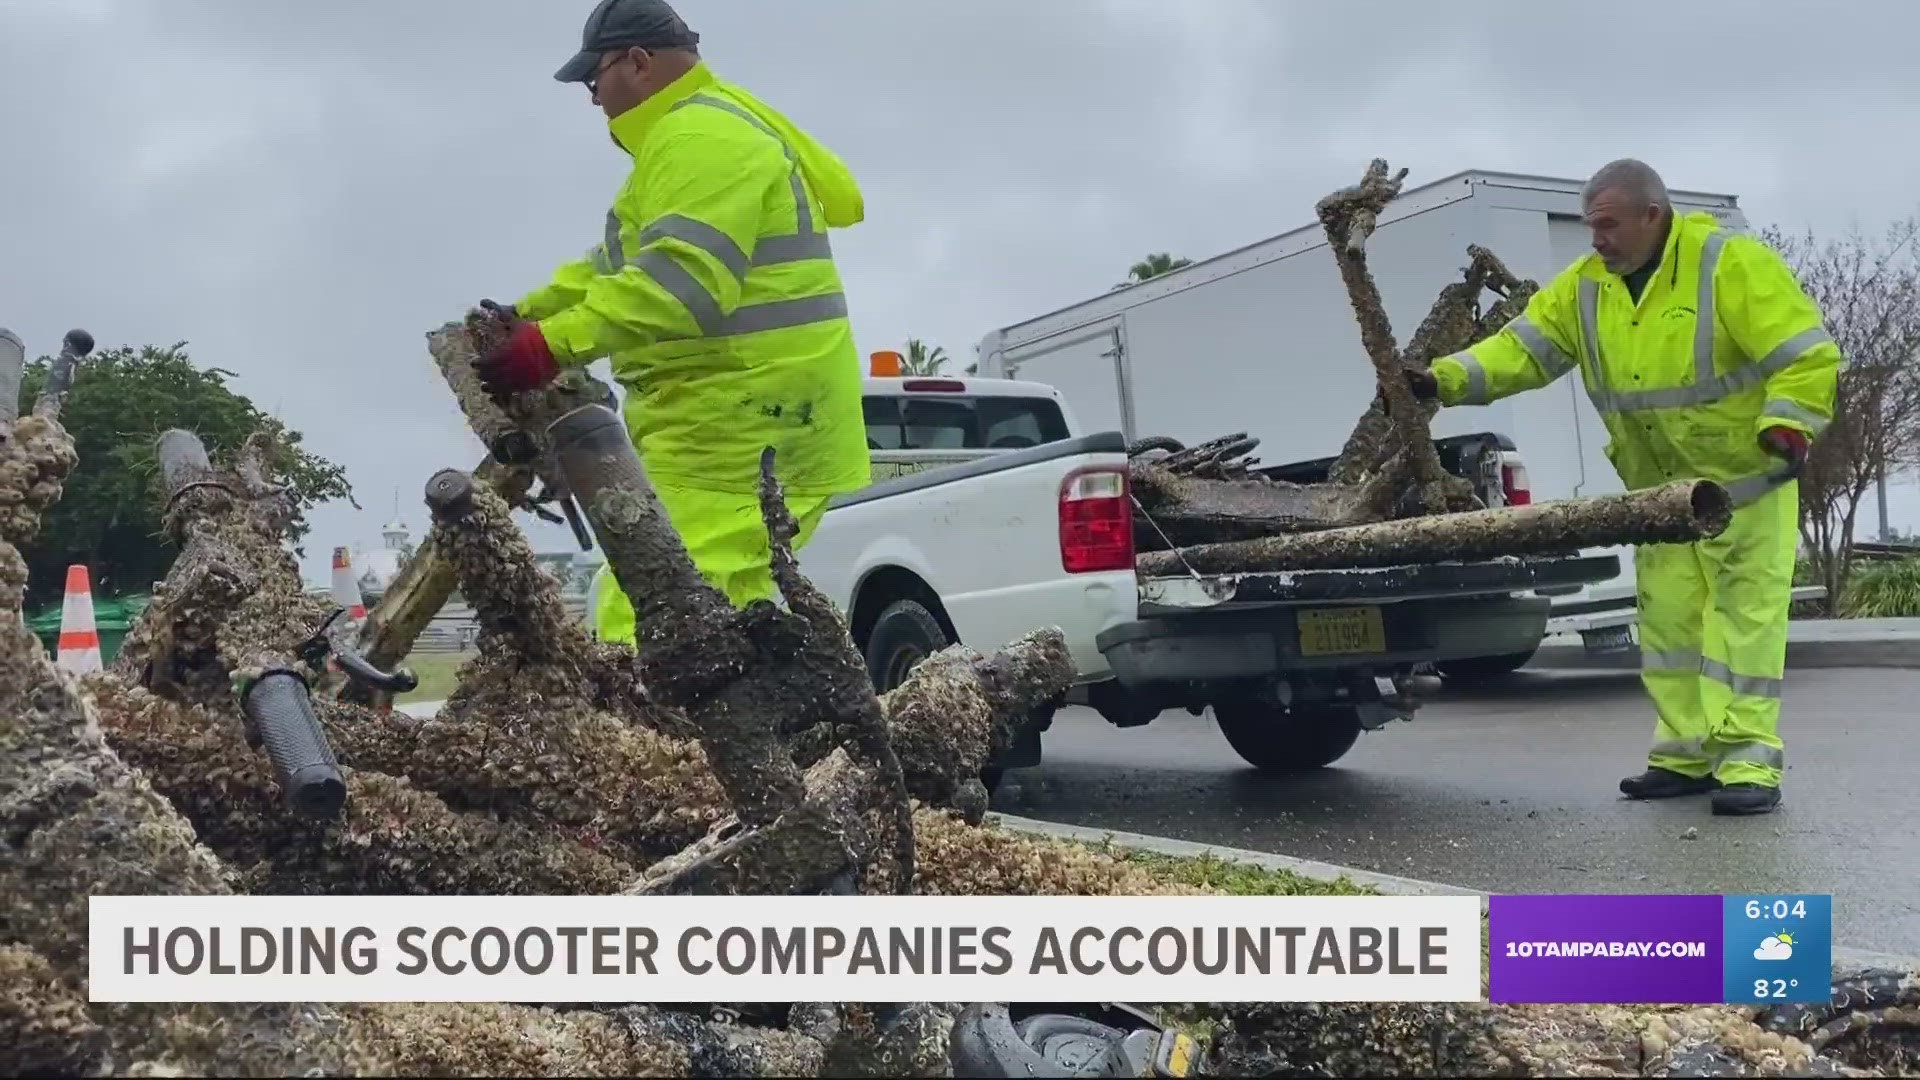 More than 200 e-scooters have been dumped in the Hillsborough River since Tampa got them in 2019. Now, new contracts with the companies are coming.